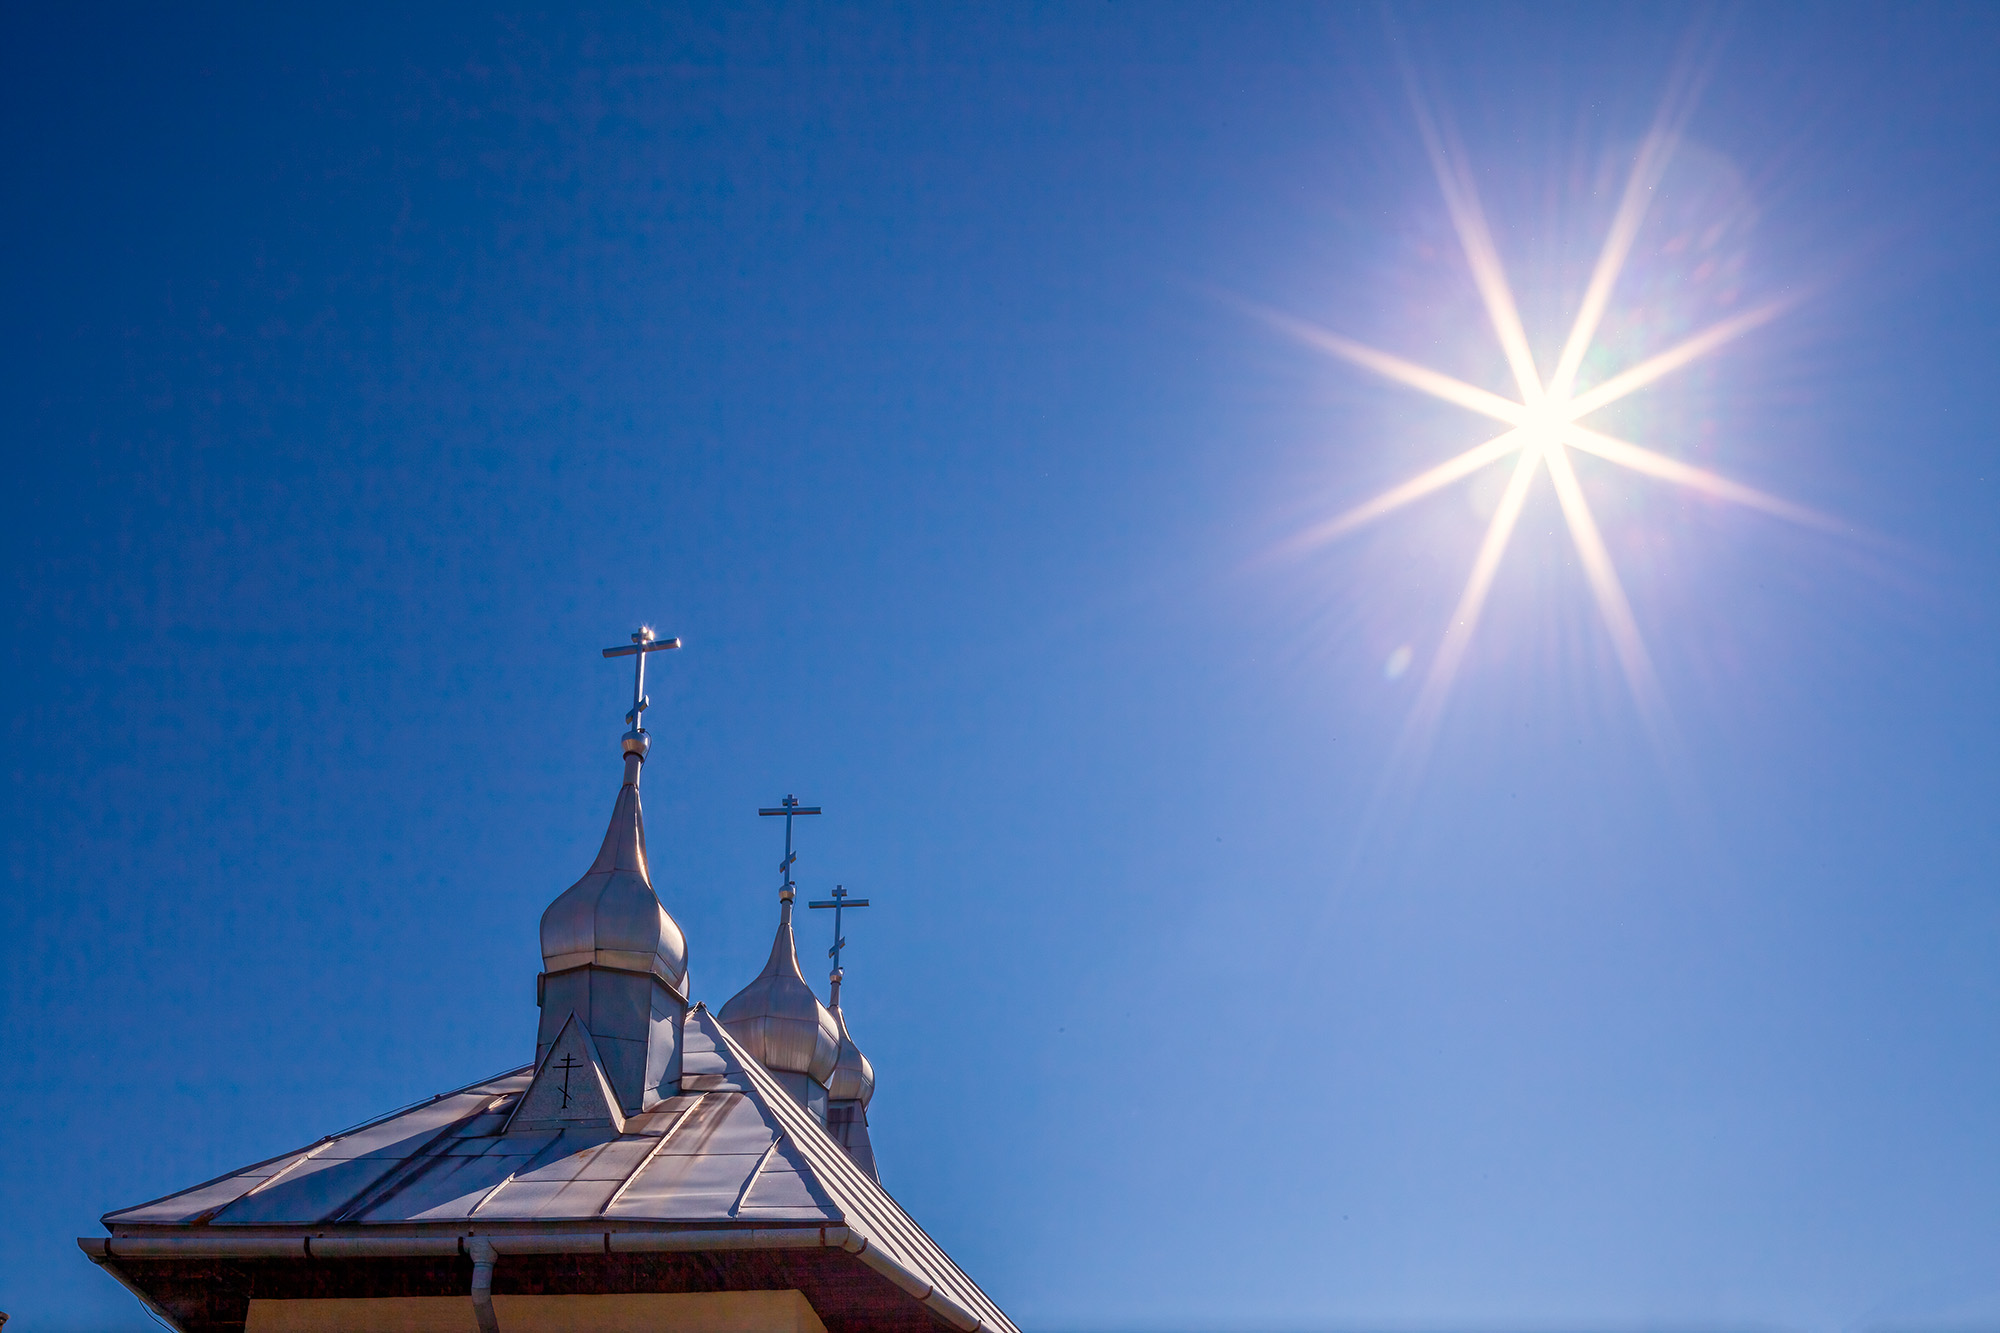 From the heart of Jedlinka, Slovakia, this image frames a radiant sunburst against a flawless blue sky. Amidst this vast azure...